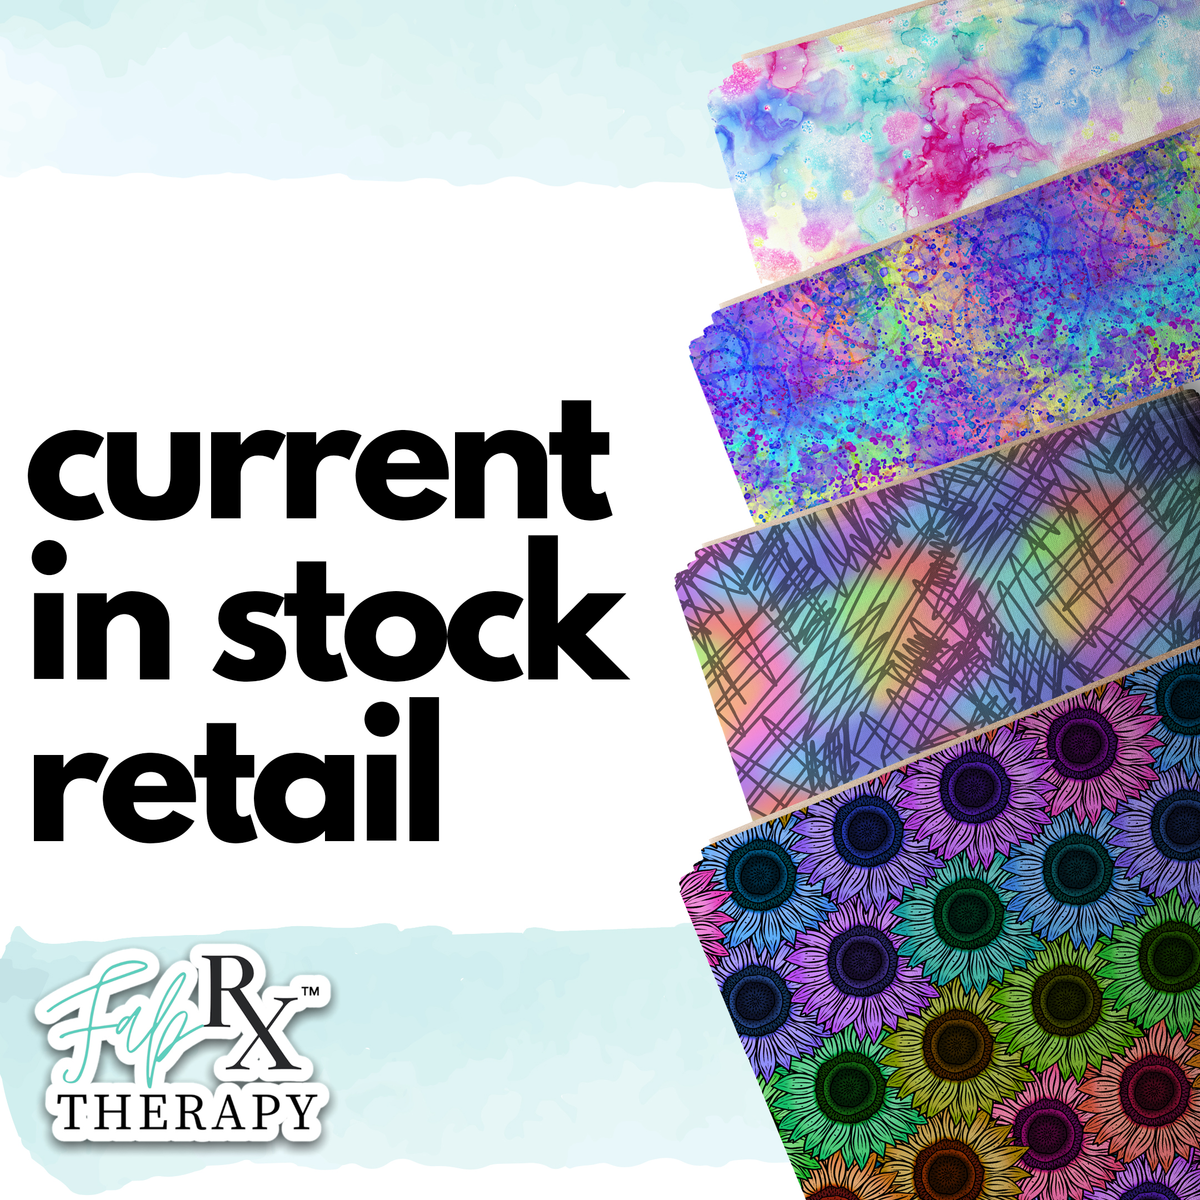 Therxtex™️ Collection - RETAIL – Fabric Therapy